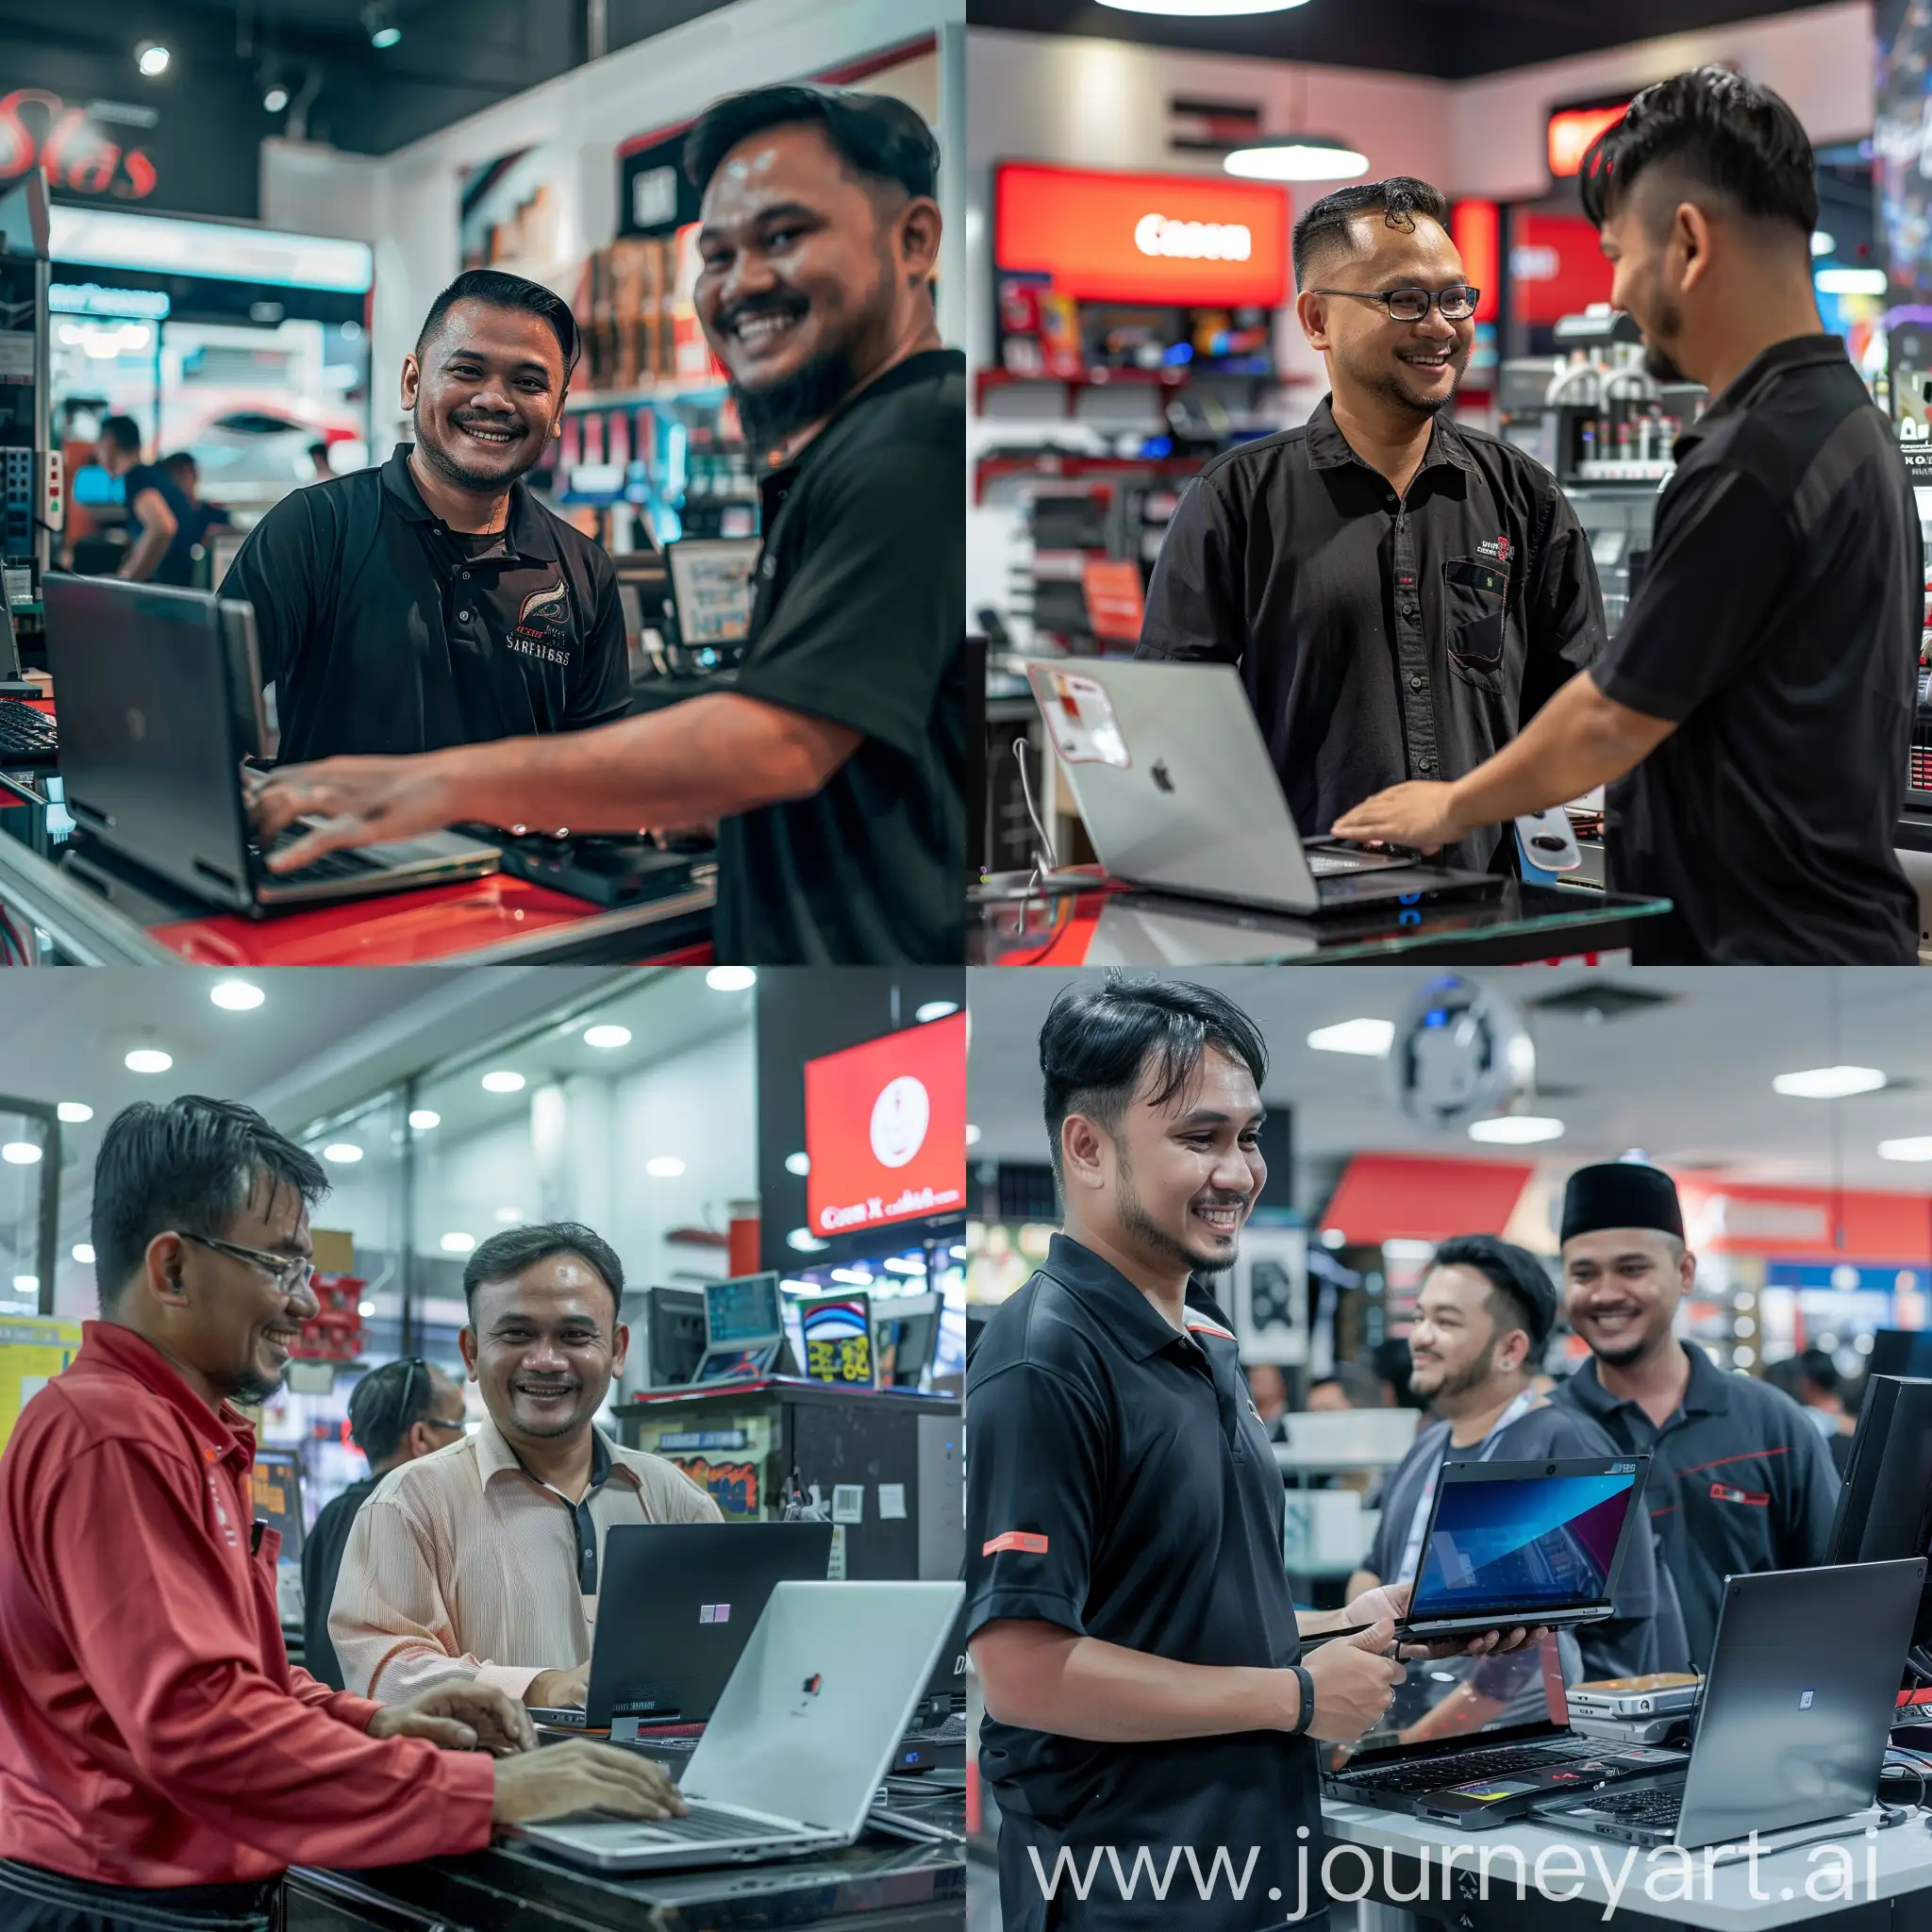 ultra realistic, malay mechanic smiling at customer who bought laptop from him on the counter, modern computer shop, canon eos-id x mark iii dslr --v 6.0